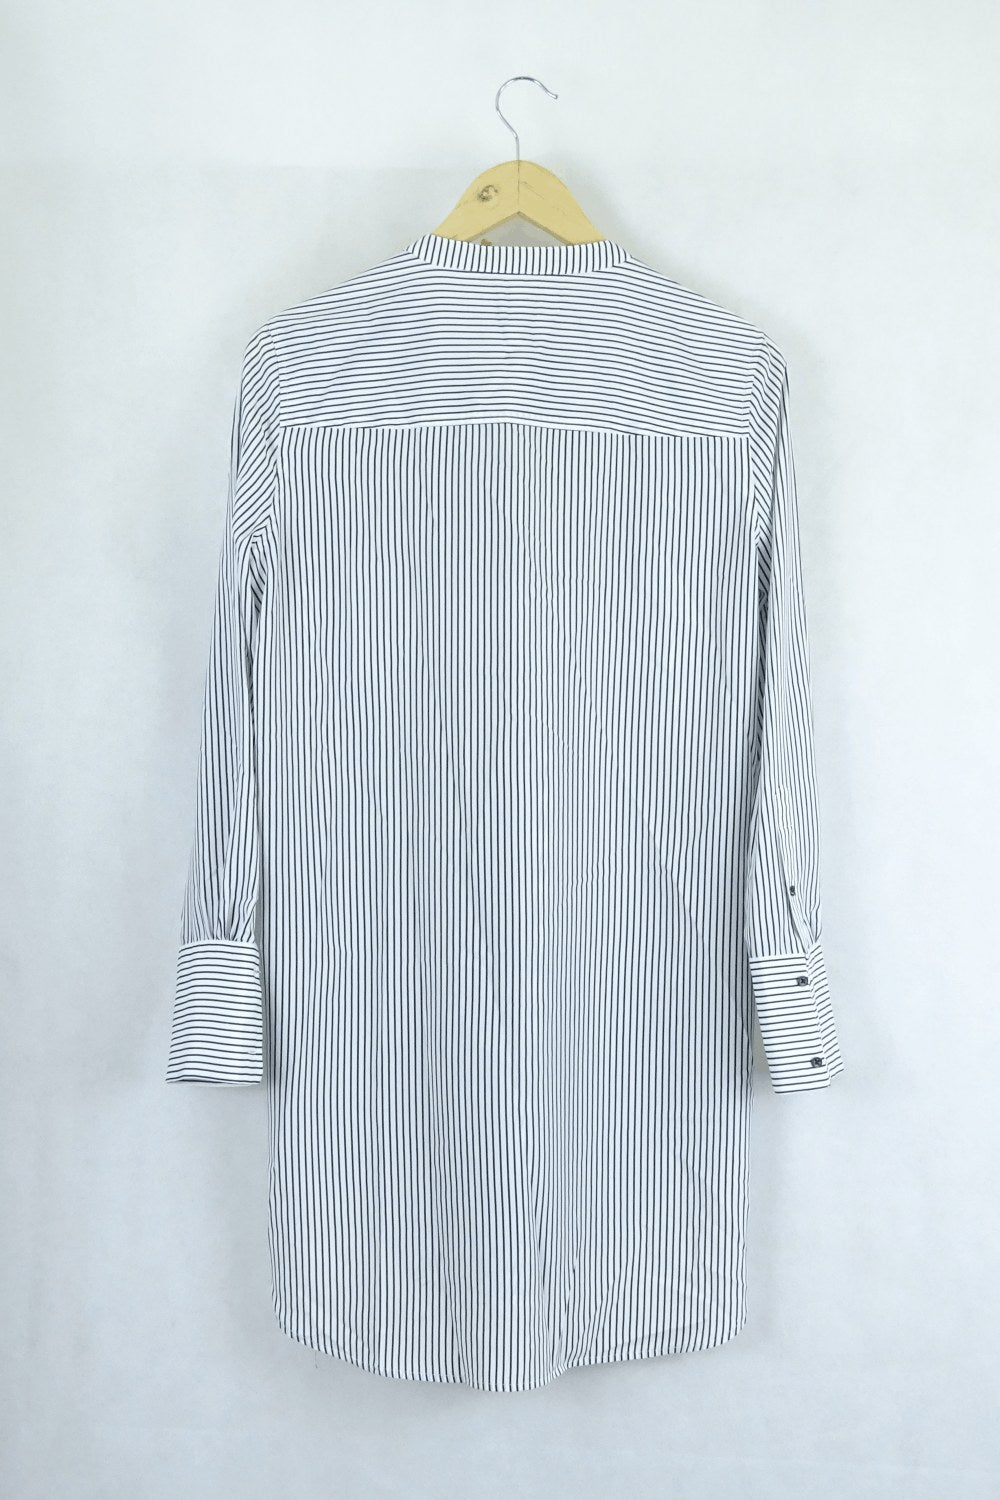 Witchery Black And White Striped Top 10